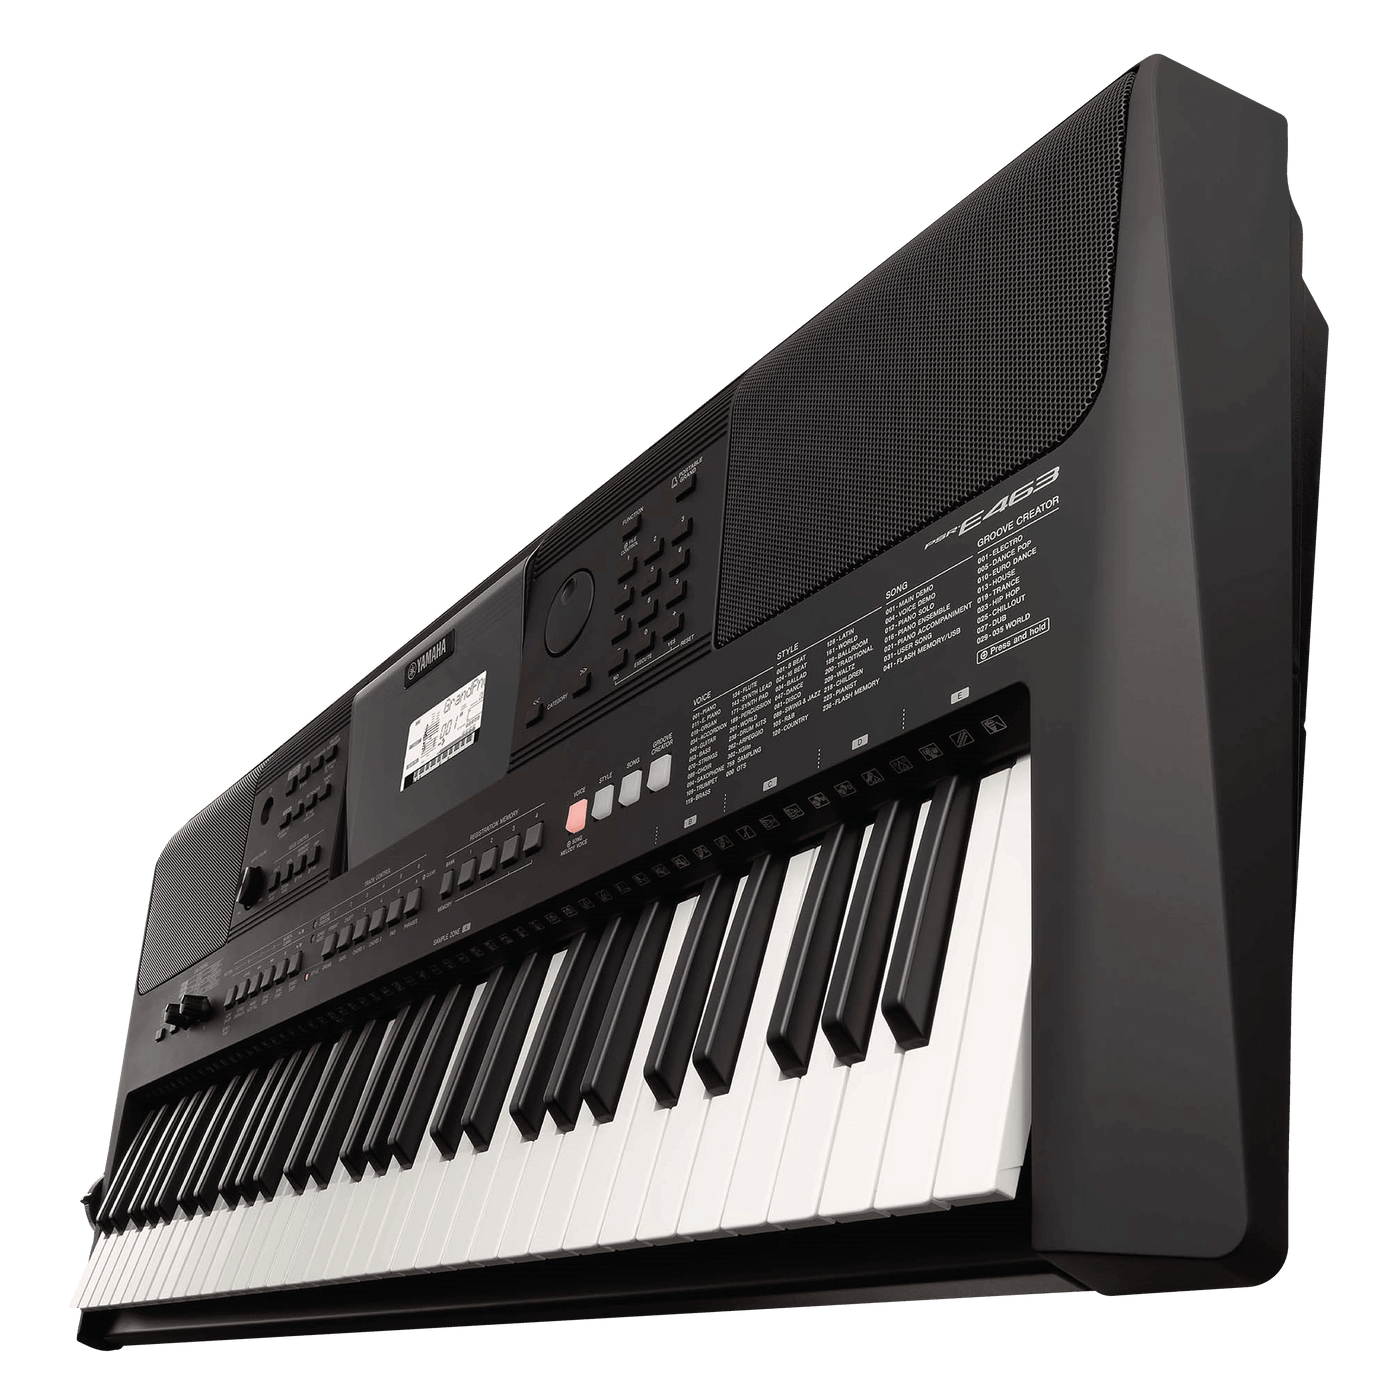 Yamaha PSR-E463 - $439990 - Gearhub - The PSR-E463 is the best entry keyboard for performing various styles of music, from the latest to vinyl favorites. It has a 61-key touch response keyboard with powerful on-board speakers and easy-to-use professional features like assignable Live Control knobs, Quick Sampling, Groove Creator and USB Audio Recorder. Información detallada del producto aquí Teclas • Cantidad: 61 • Tipo: Organ-style • Sensibilidad: Yes (Soft, Medium, Hard, Fixed) Características Generales •